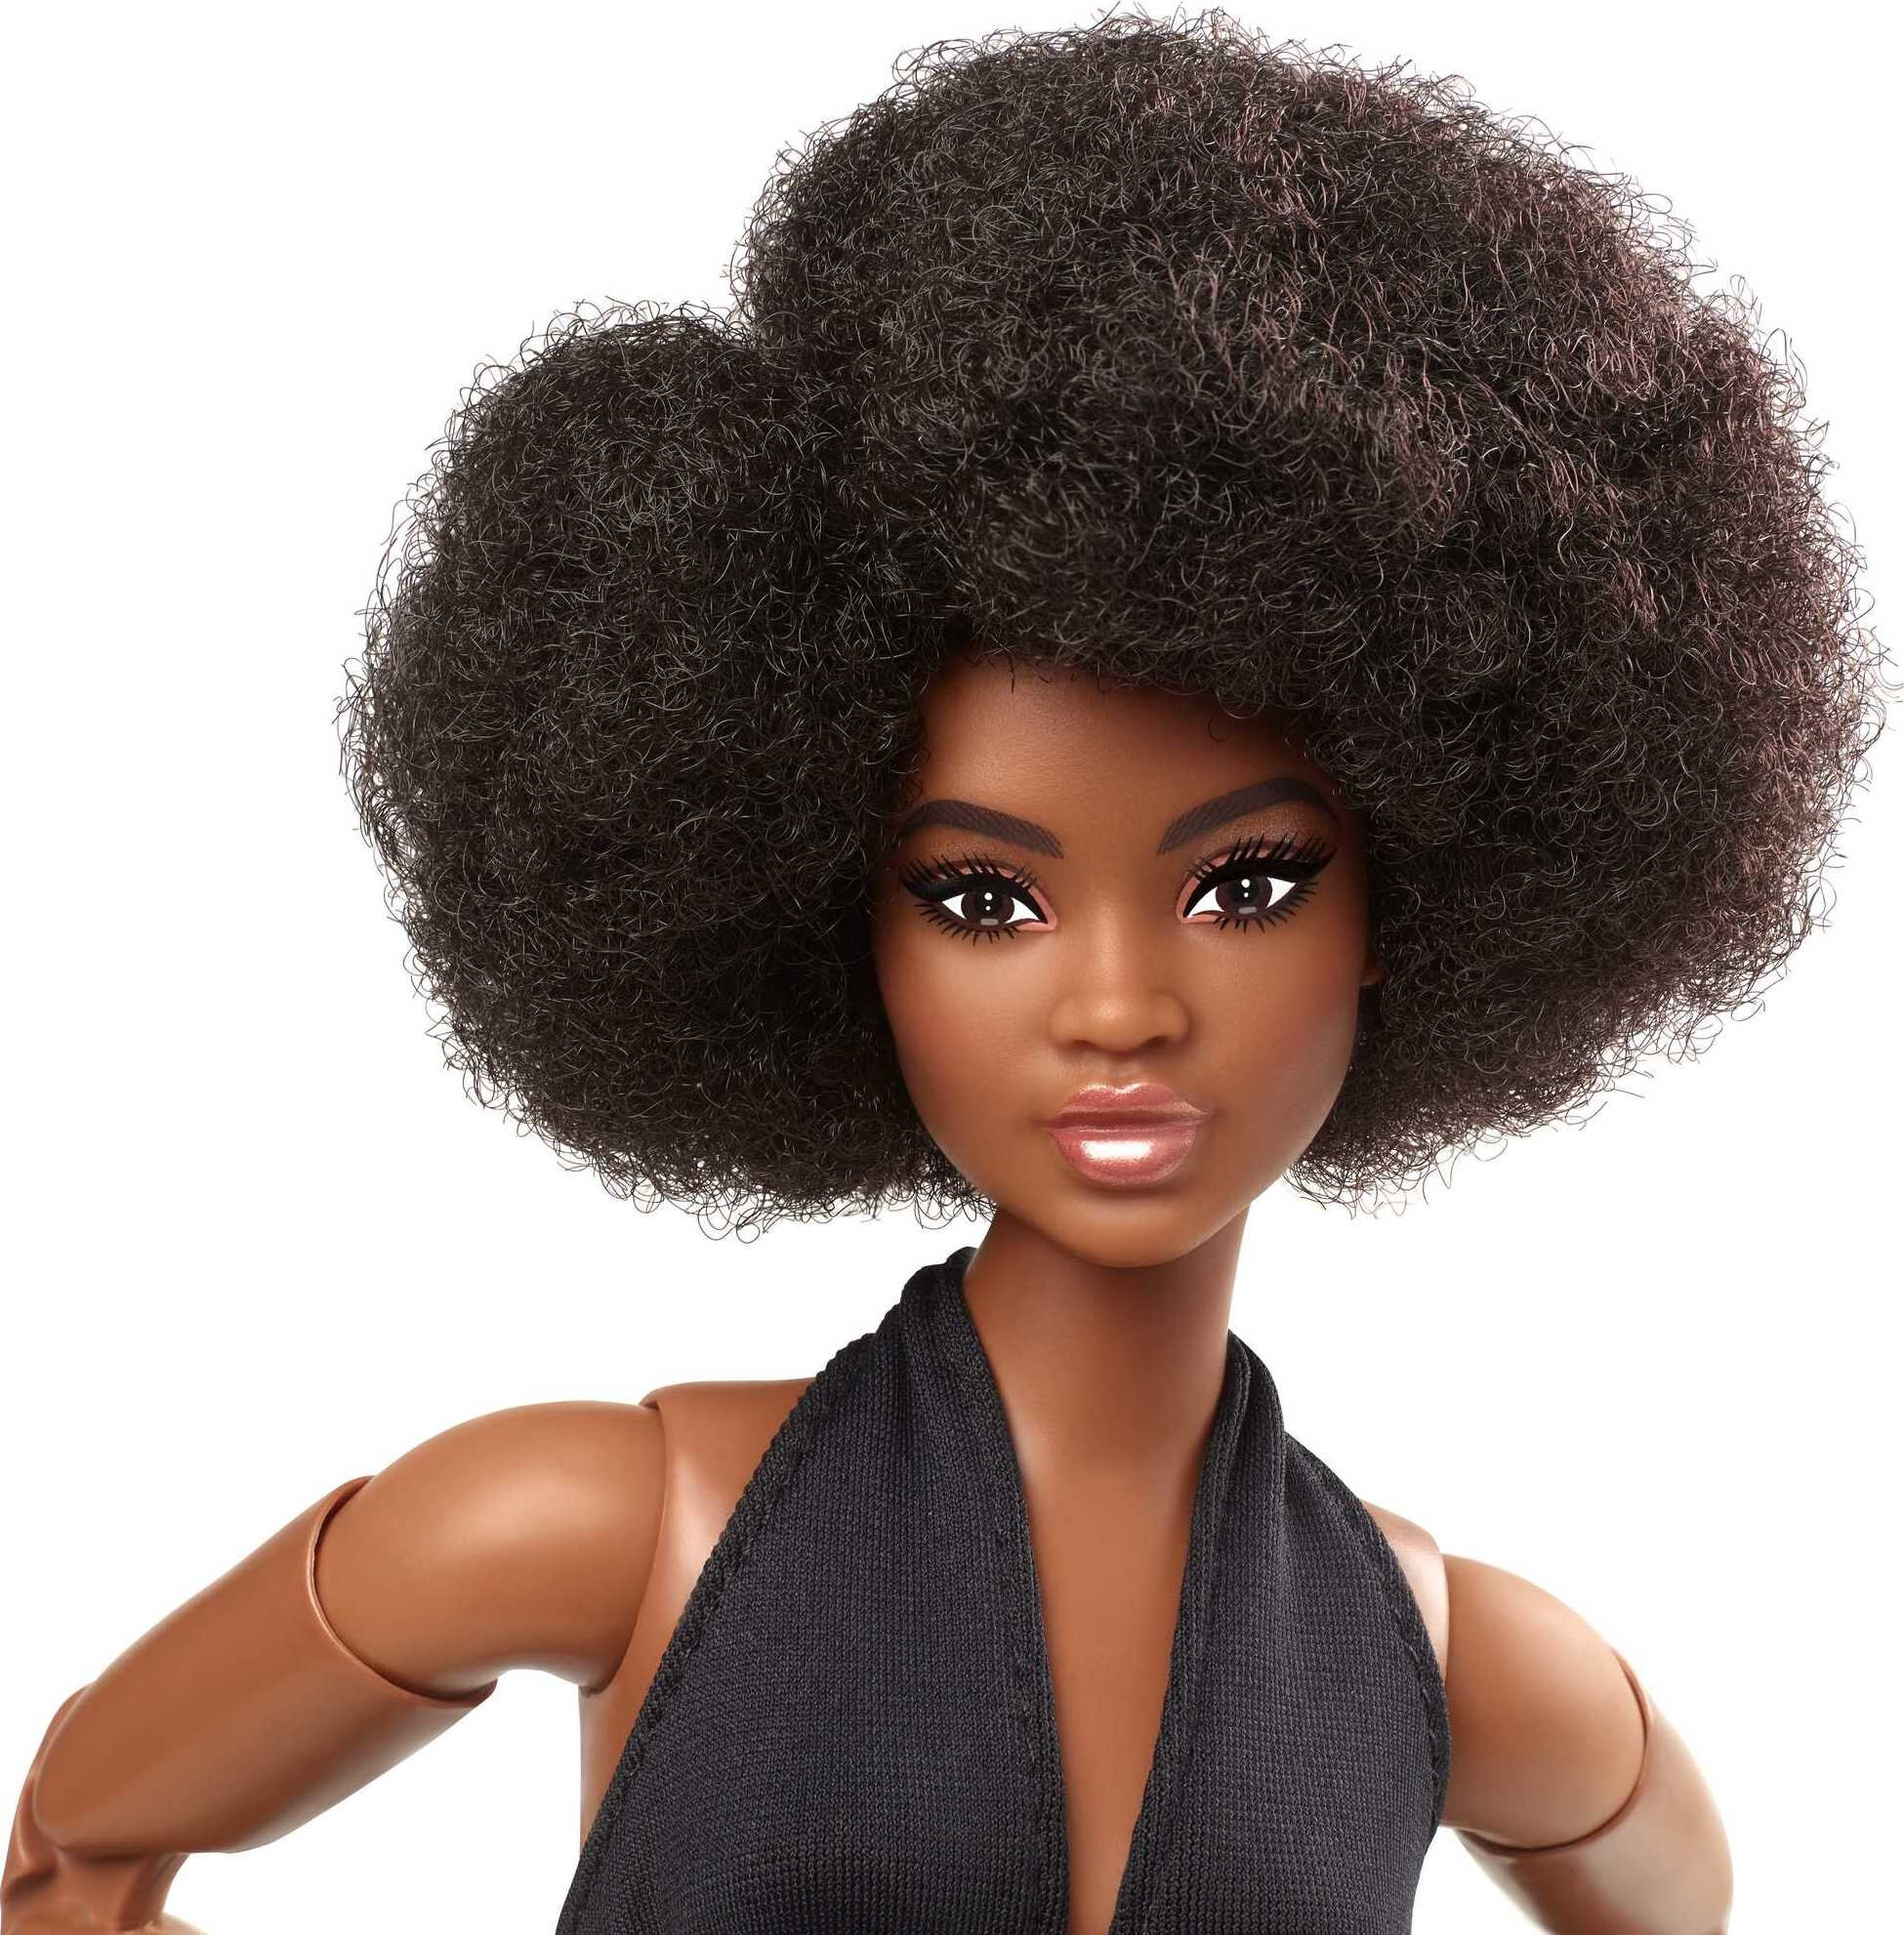 Barbie Looks Collectible Fashion Doll, Posable with Natural Hair & Black Jumpsuit - image 4 of 5